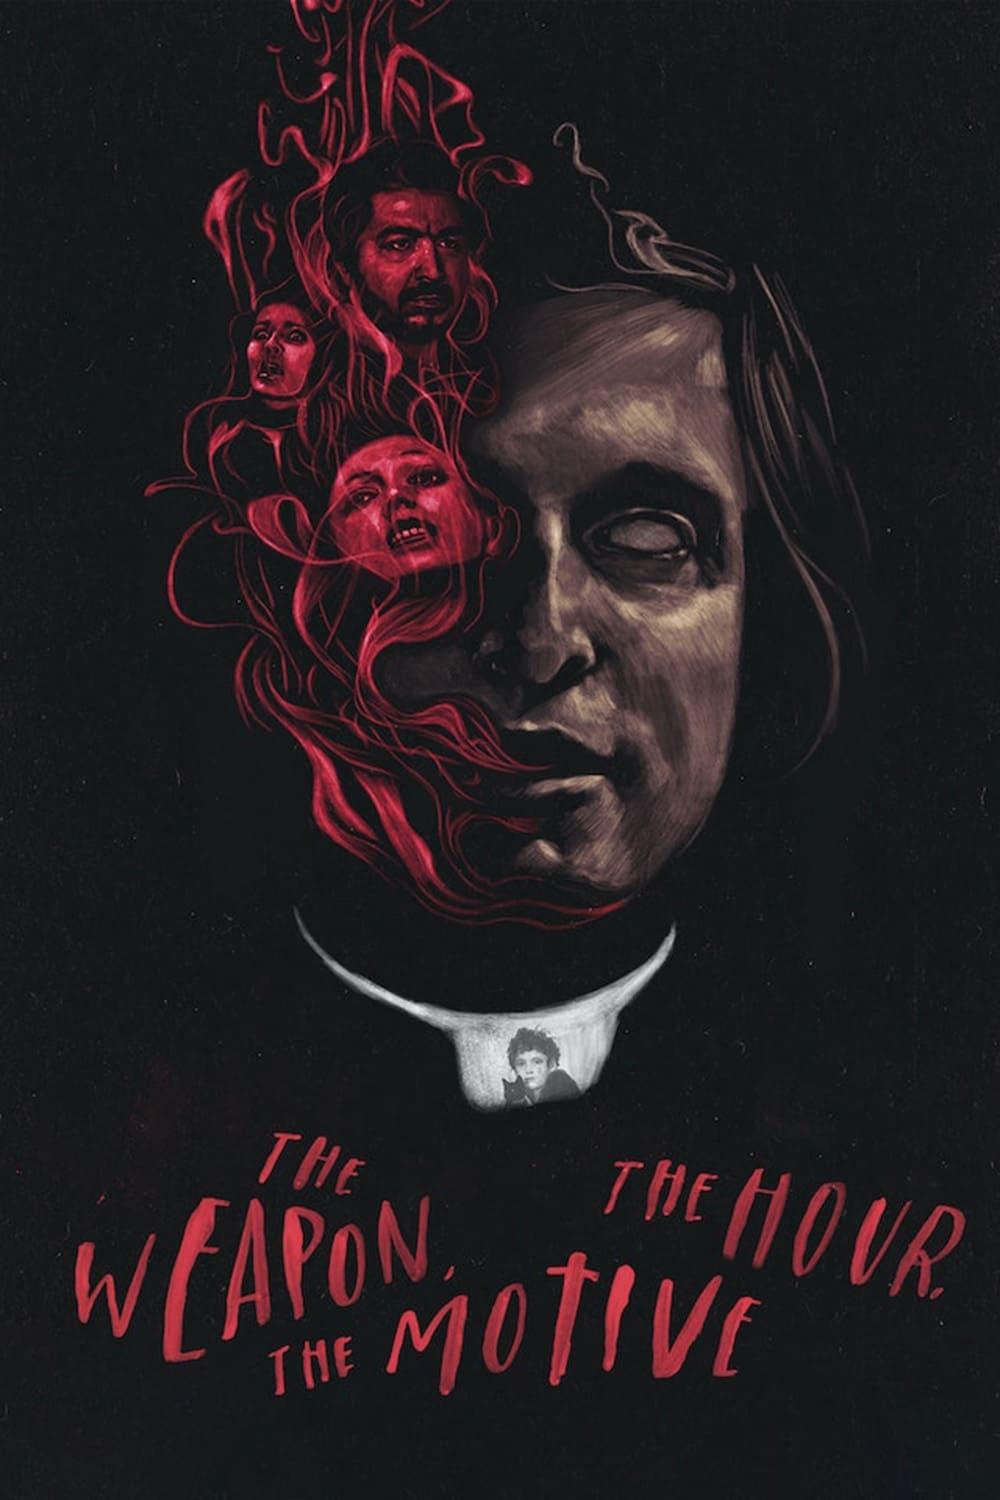 The Weapon, the Hour, the Motive poster